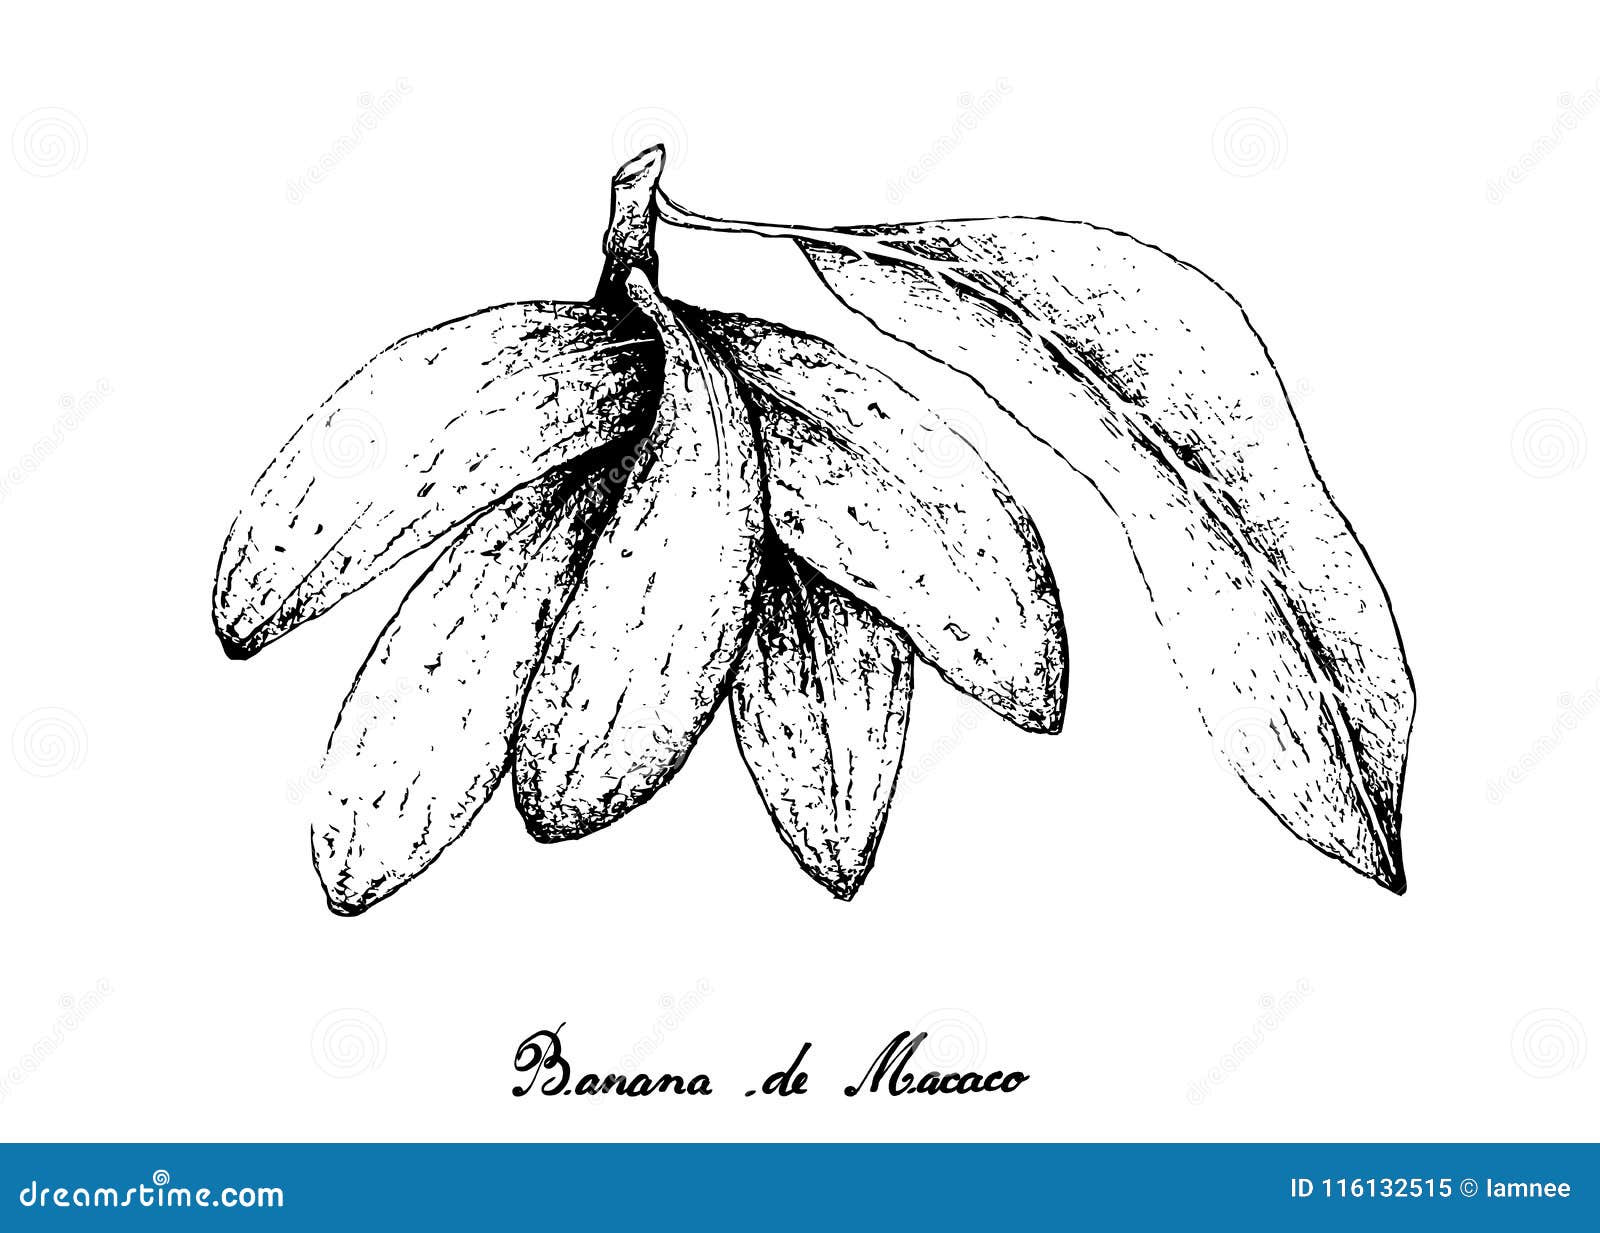 hand drawn of banana de macaco fruits on white background